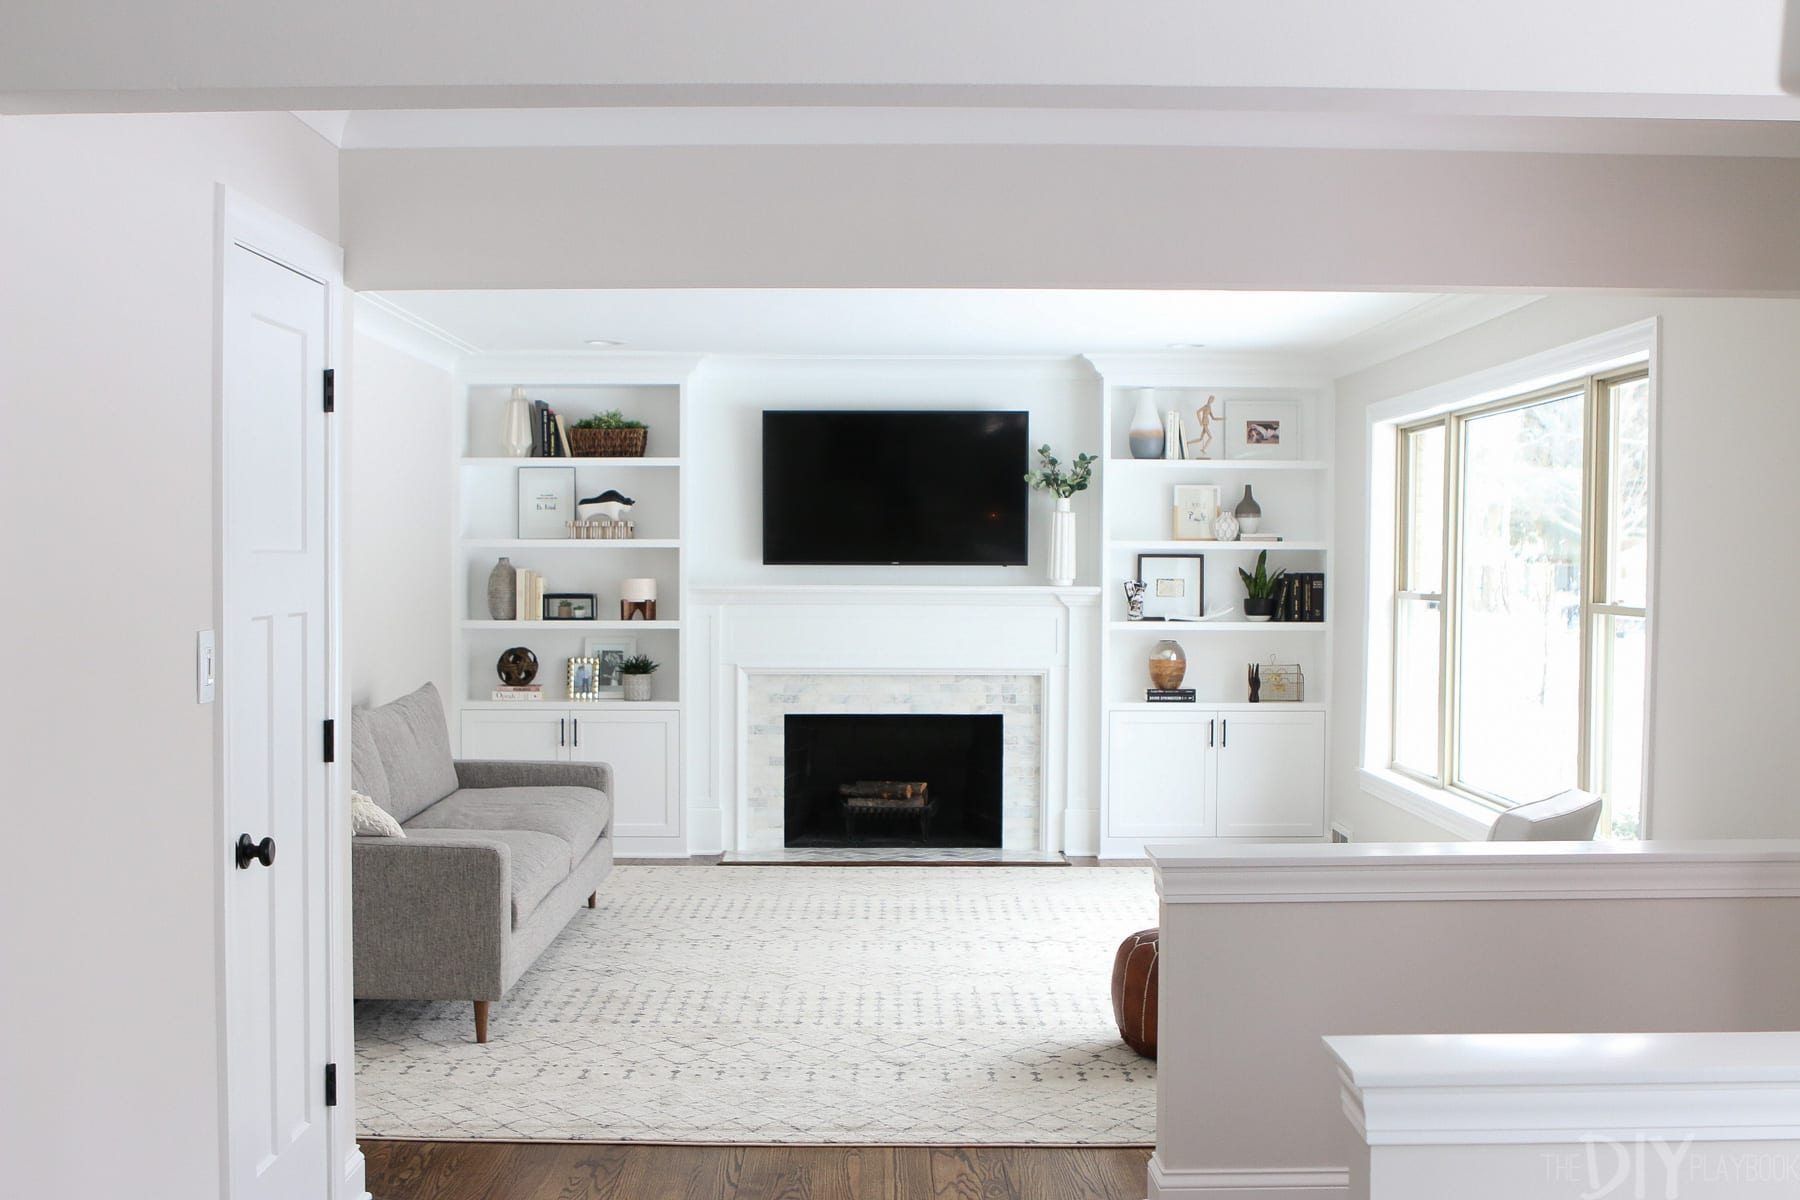 White Built Ins Around The Fireplace, Diy Built In Shelves Around Fireplace